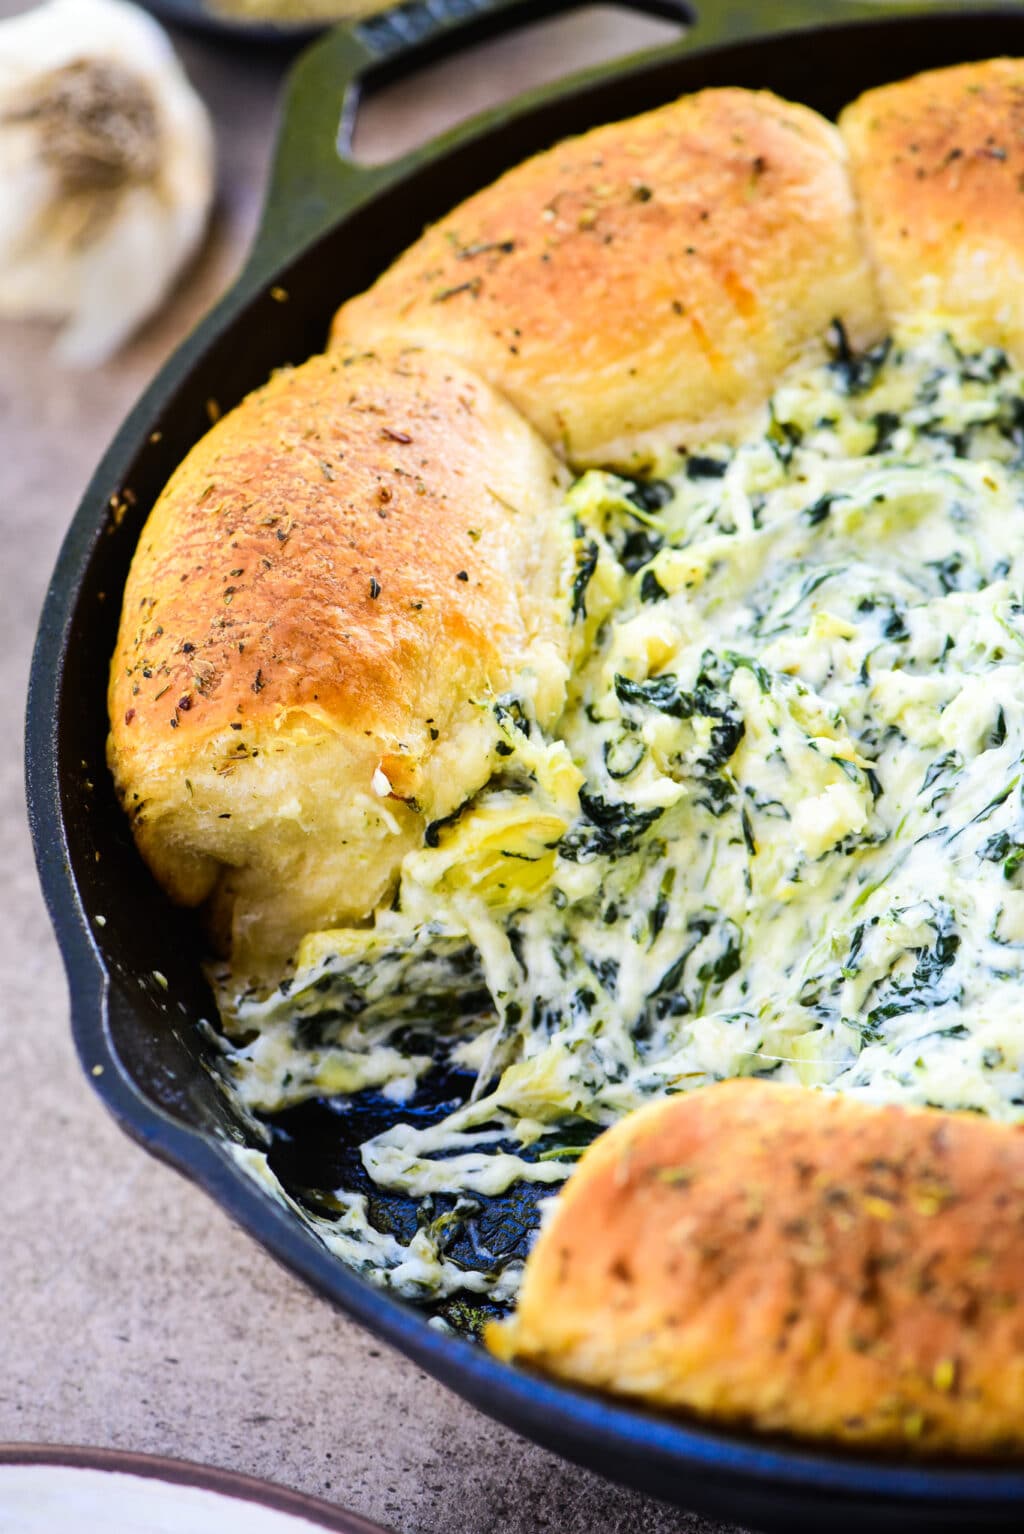 artichoke dip served with biscuits stuffed with cheese